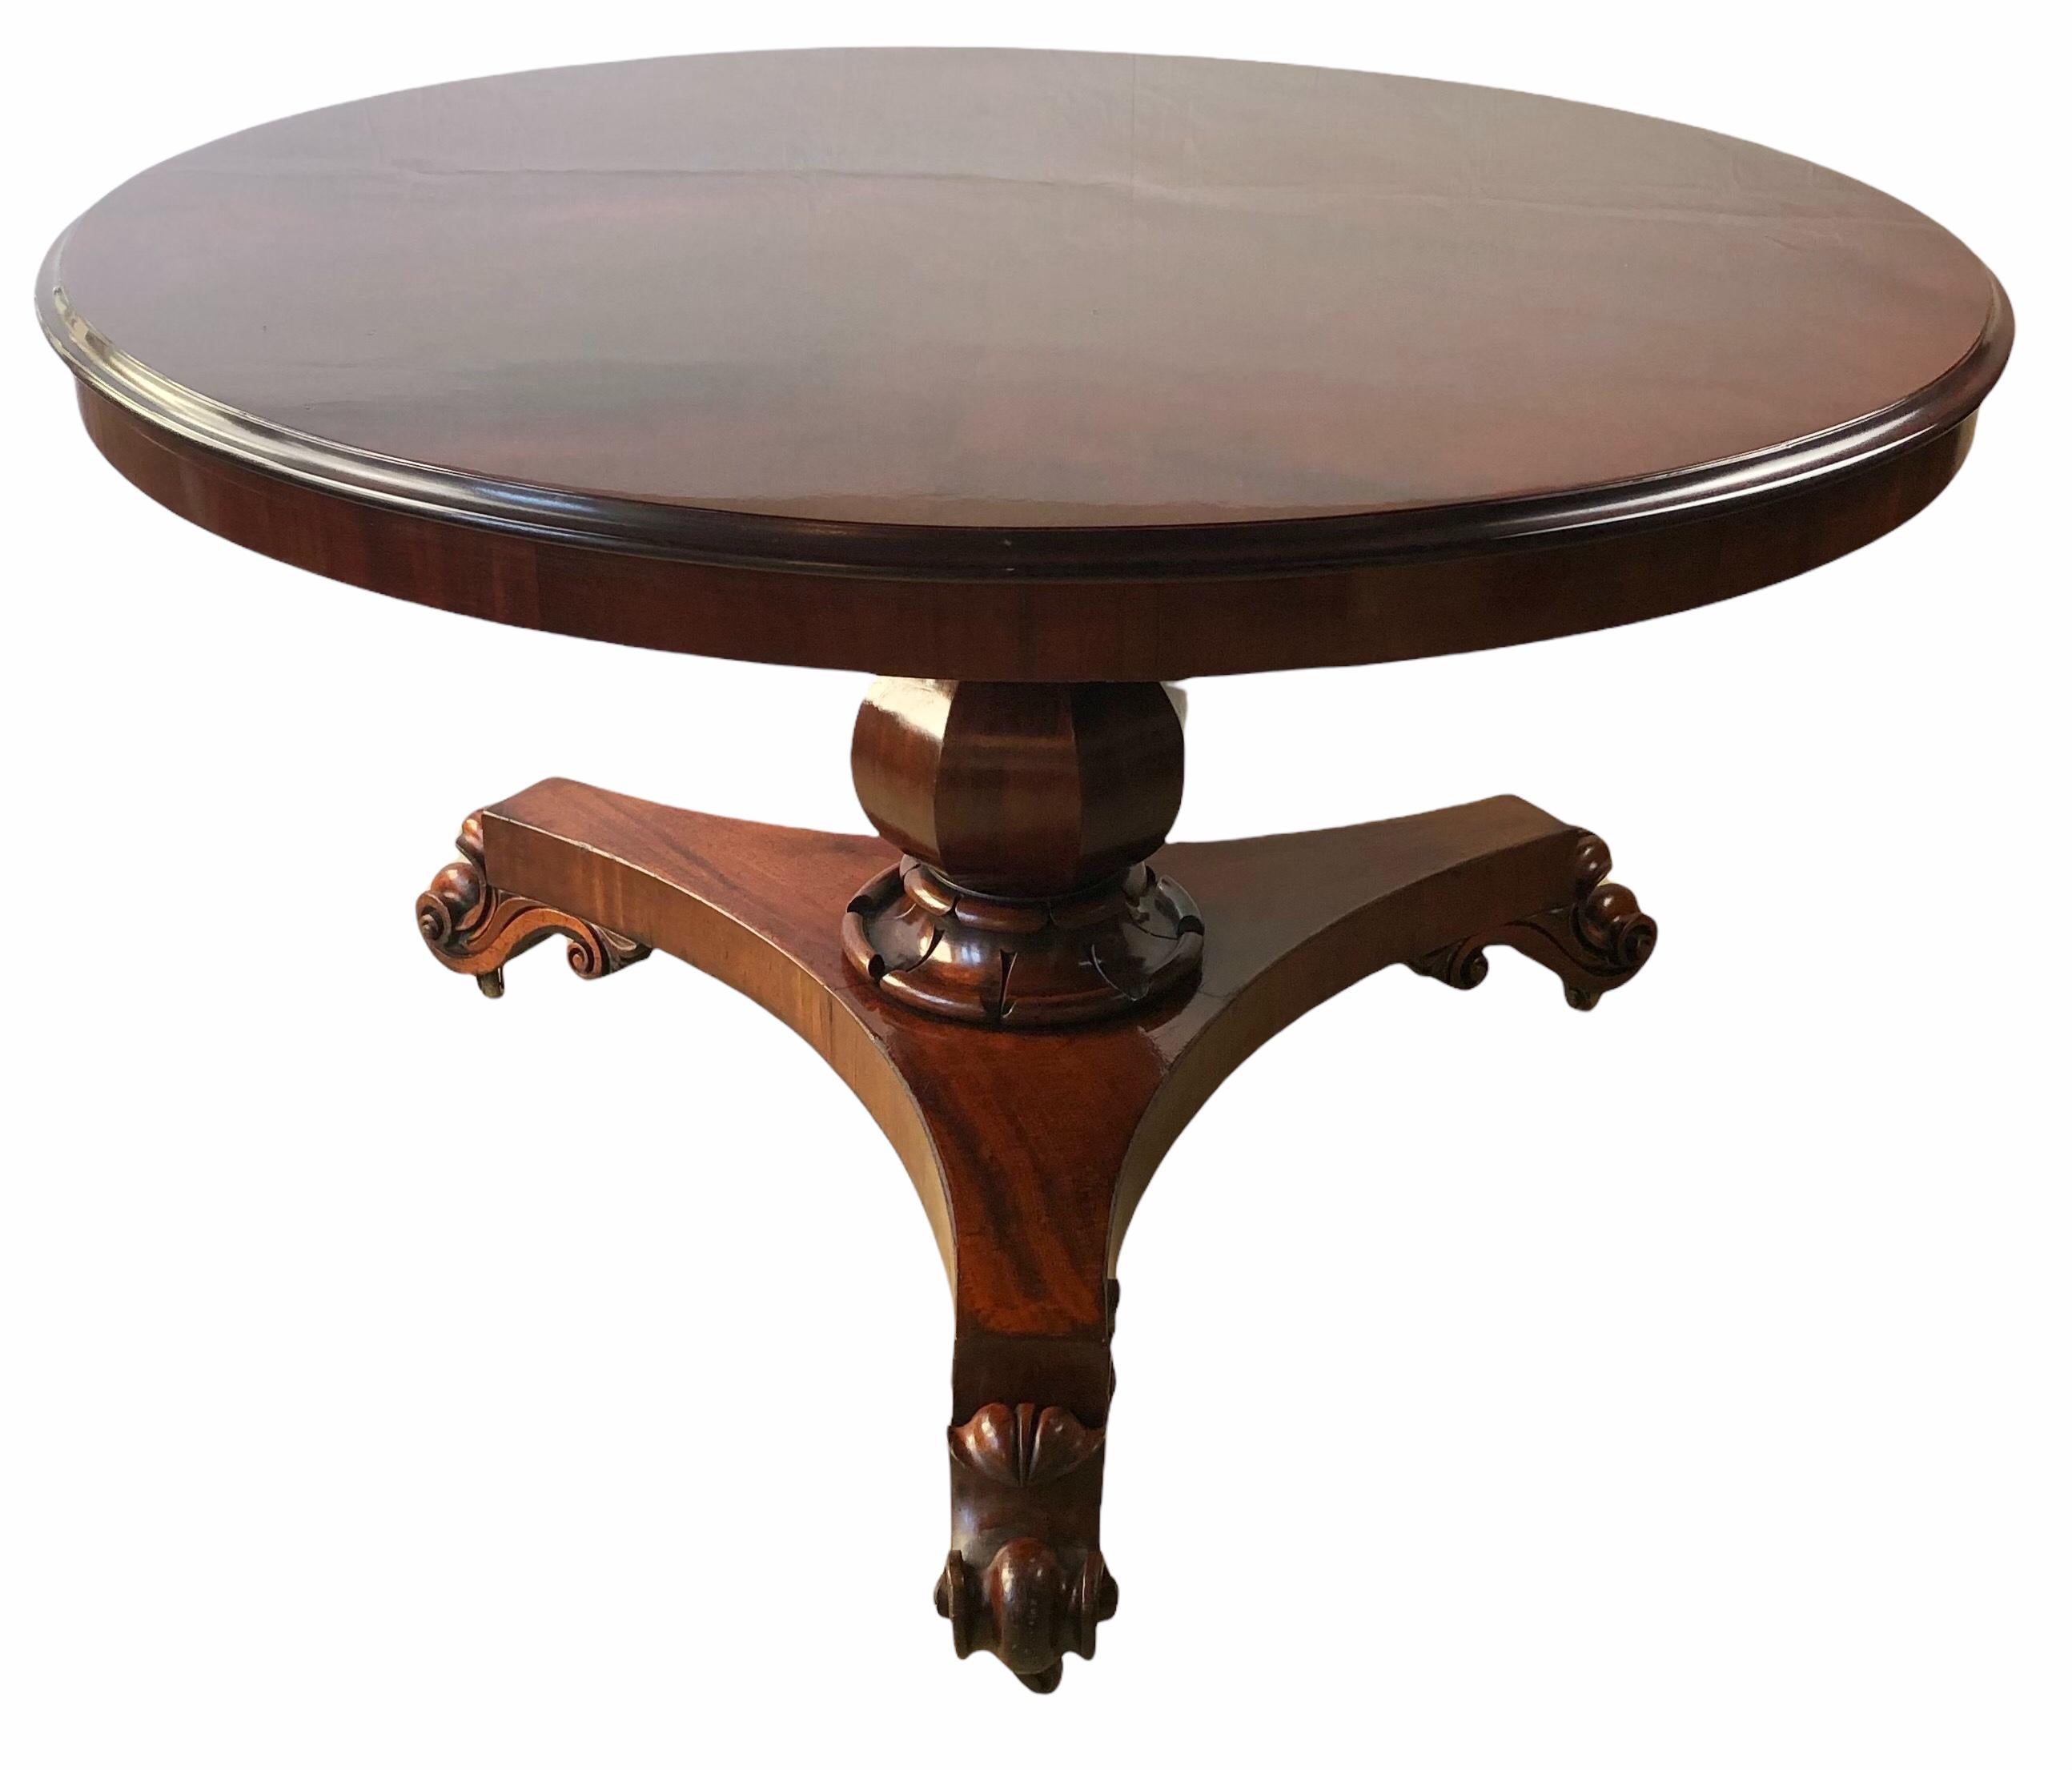 A stunning 19th Century Victorian Tilt-Top Center Table or Large Round Mahogany Dining Table.

An exceptional round tilt-top table with rich solid mahogany of spectacular butterfly or open book cut. This is not a table with veneer, instead solid